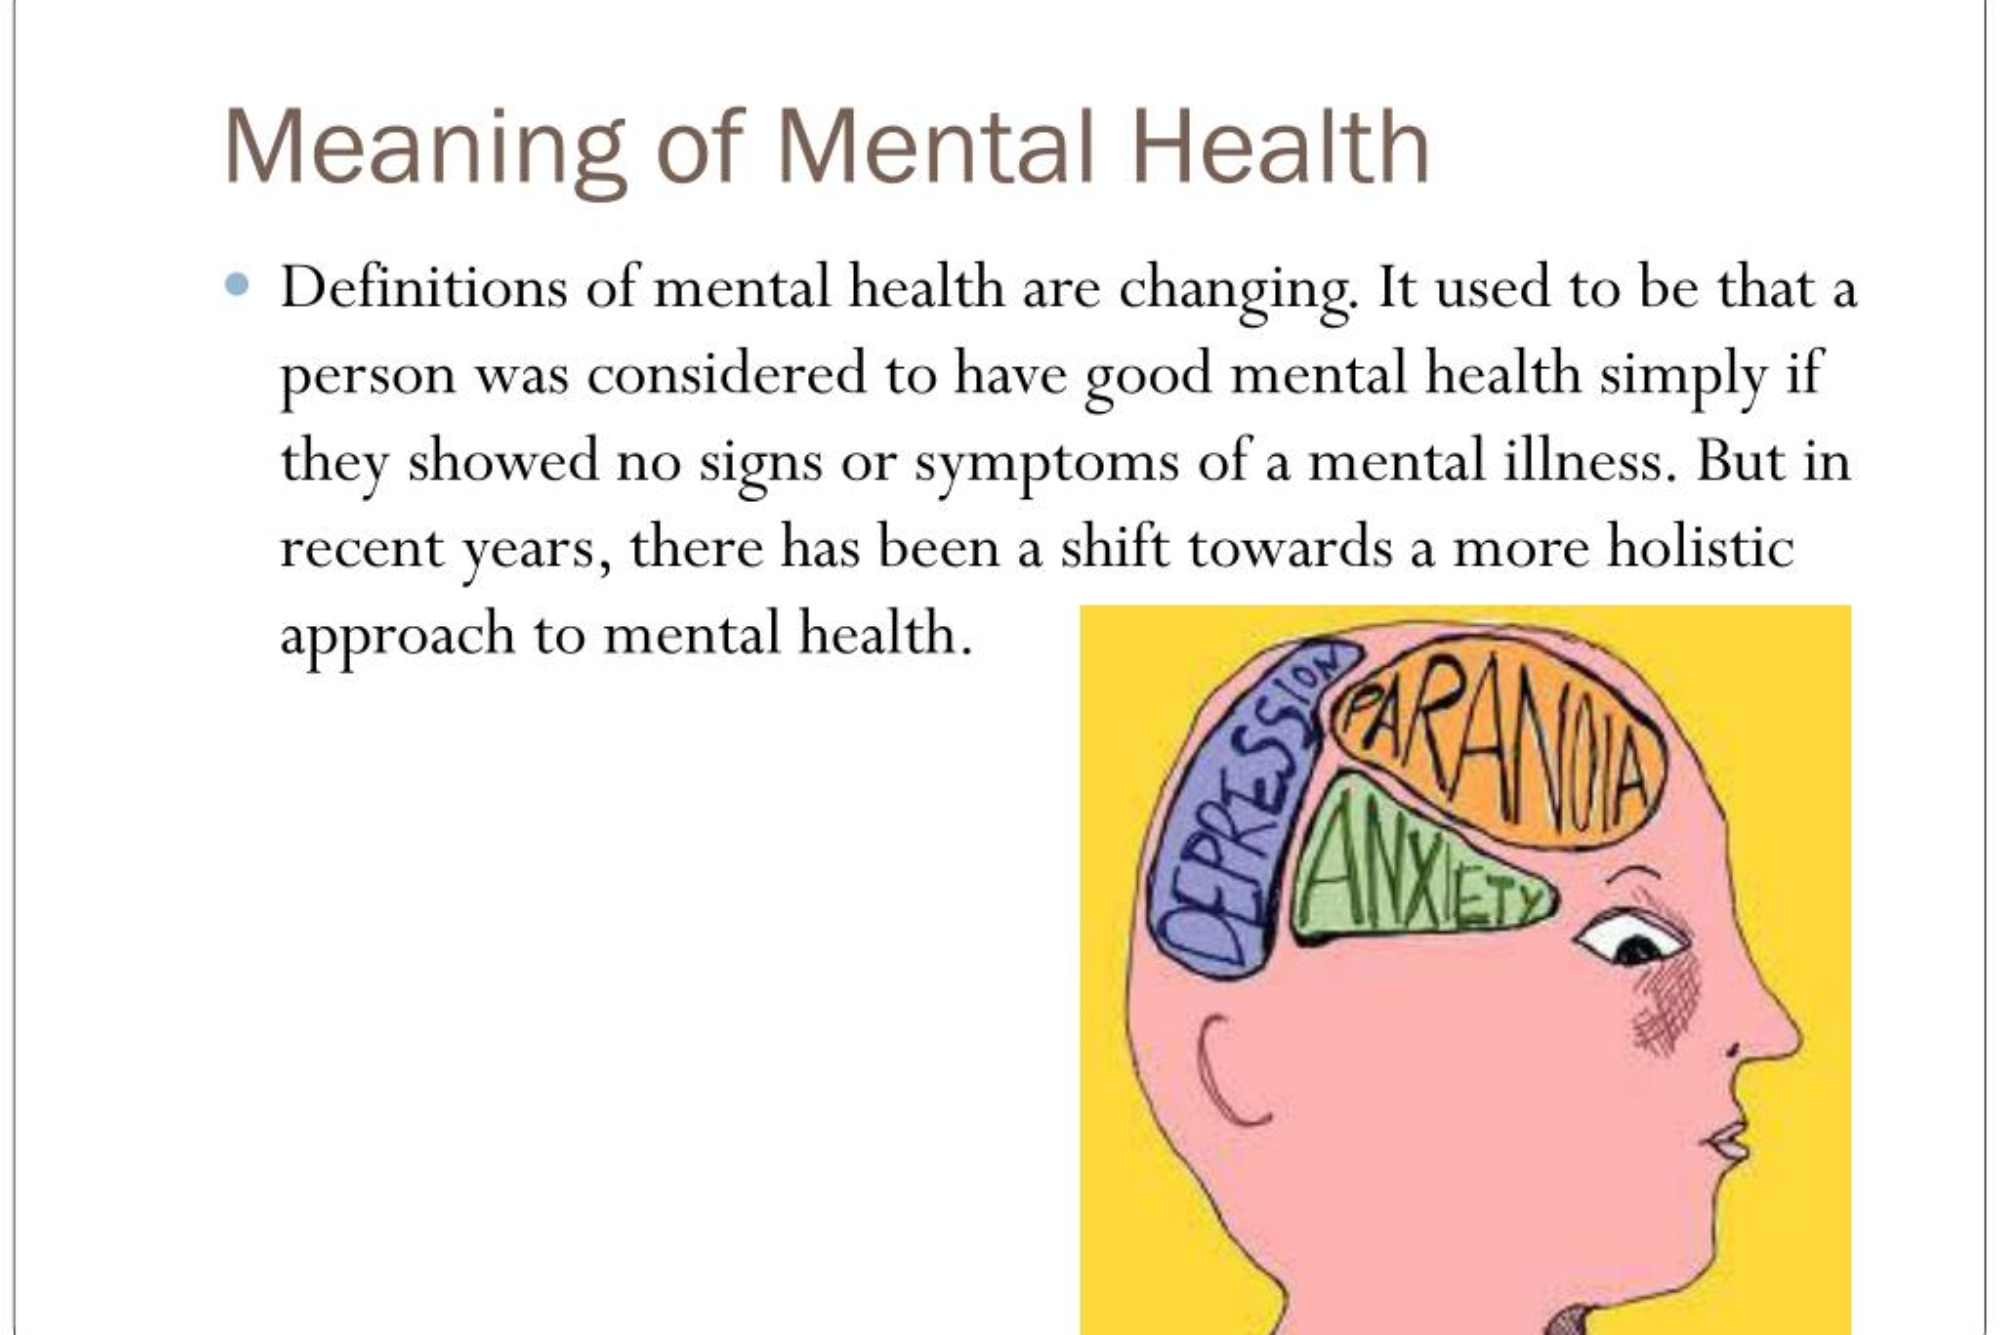 what is meant by mental health